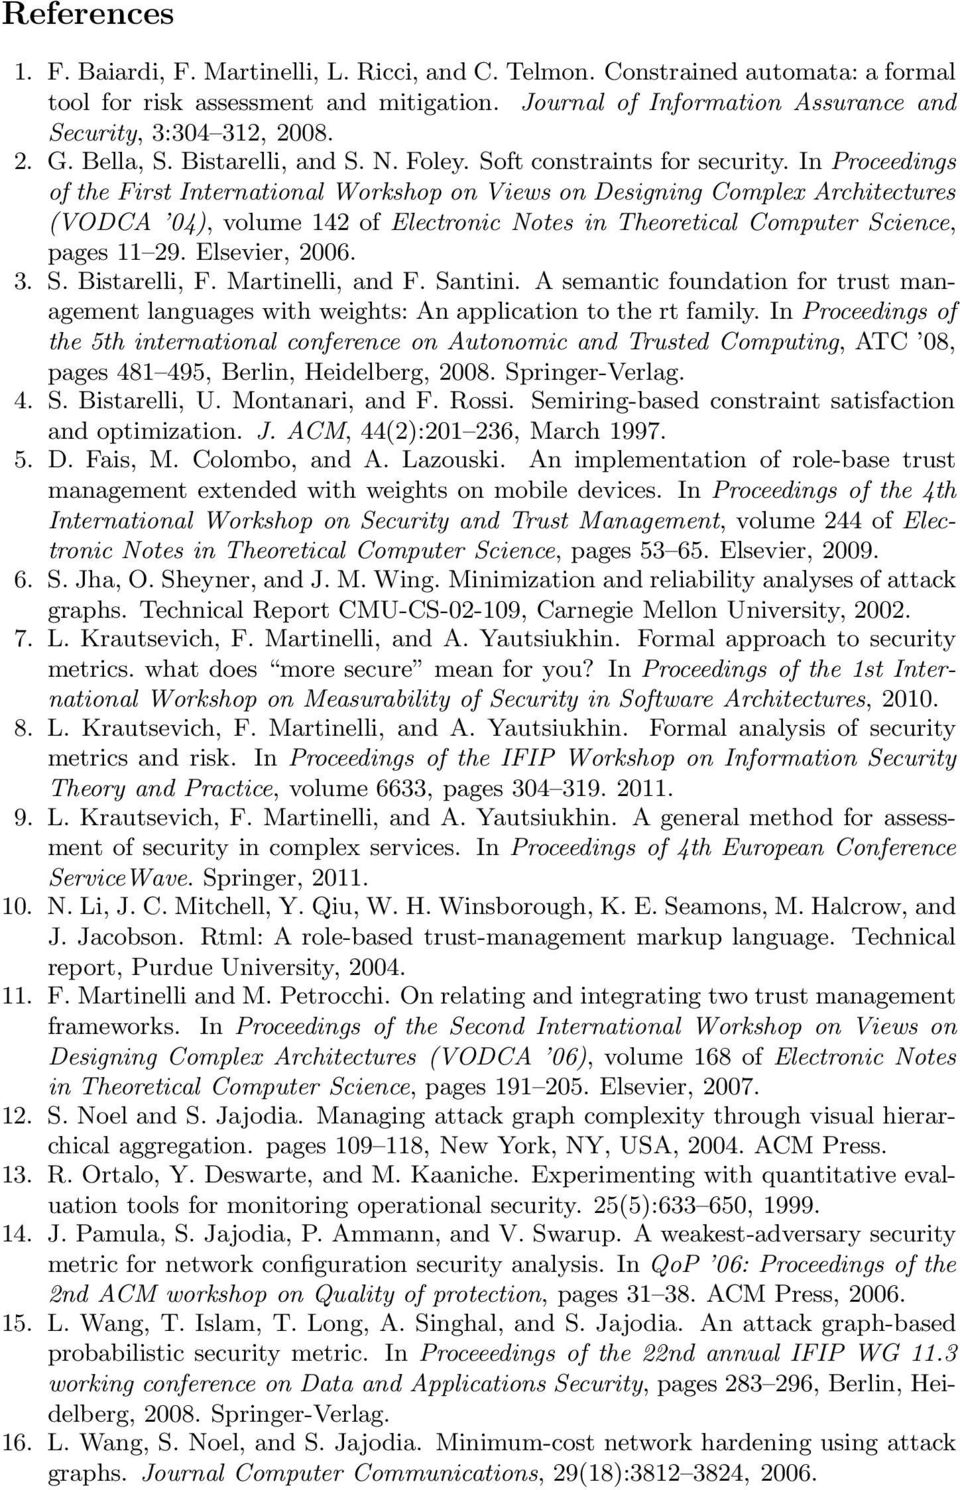 In Proceedings of the First International Workshop on Views on Designing Complex Architectures (VODCA 04), volume 142 of Electronic Notes in Theoretical Computer Science, pages 11 29. Elsevier, 2006.